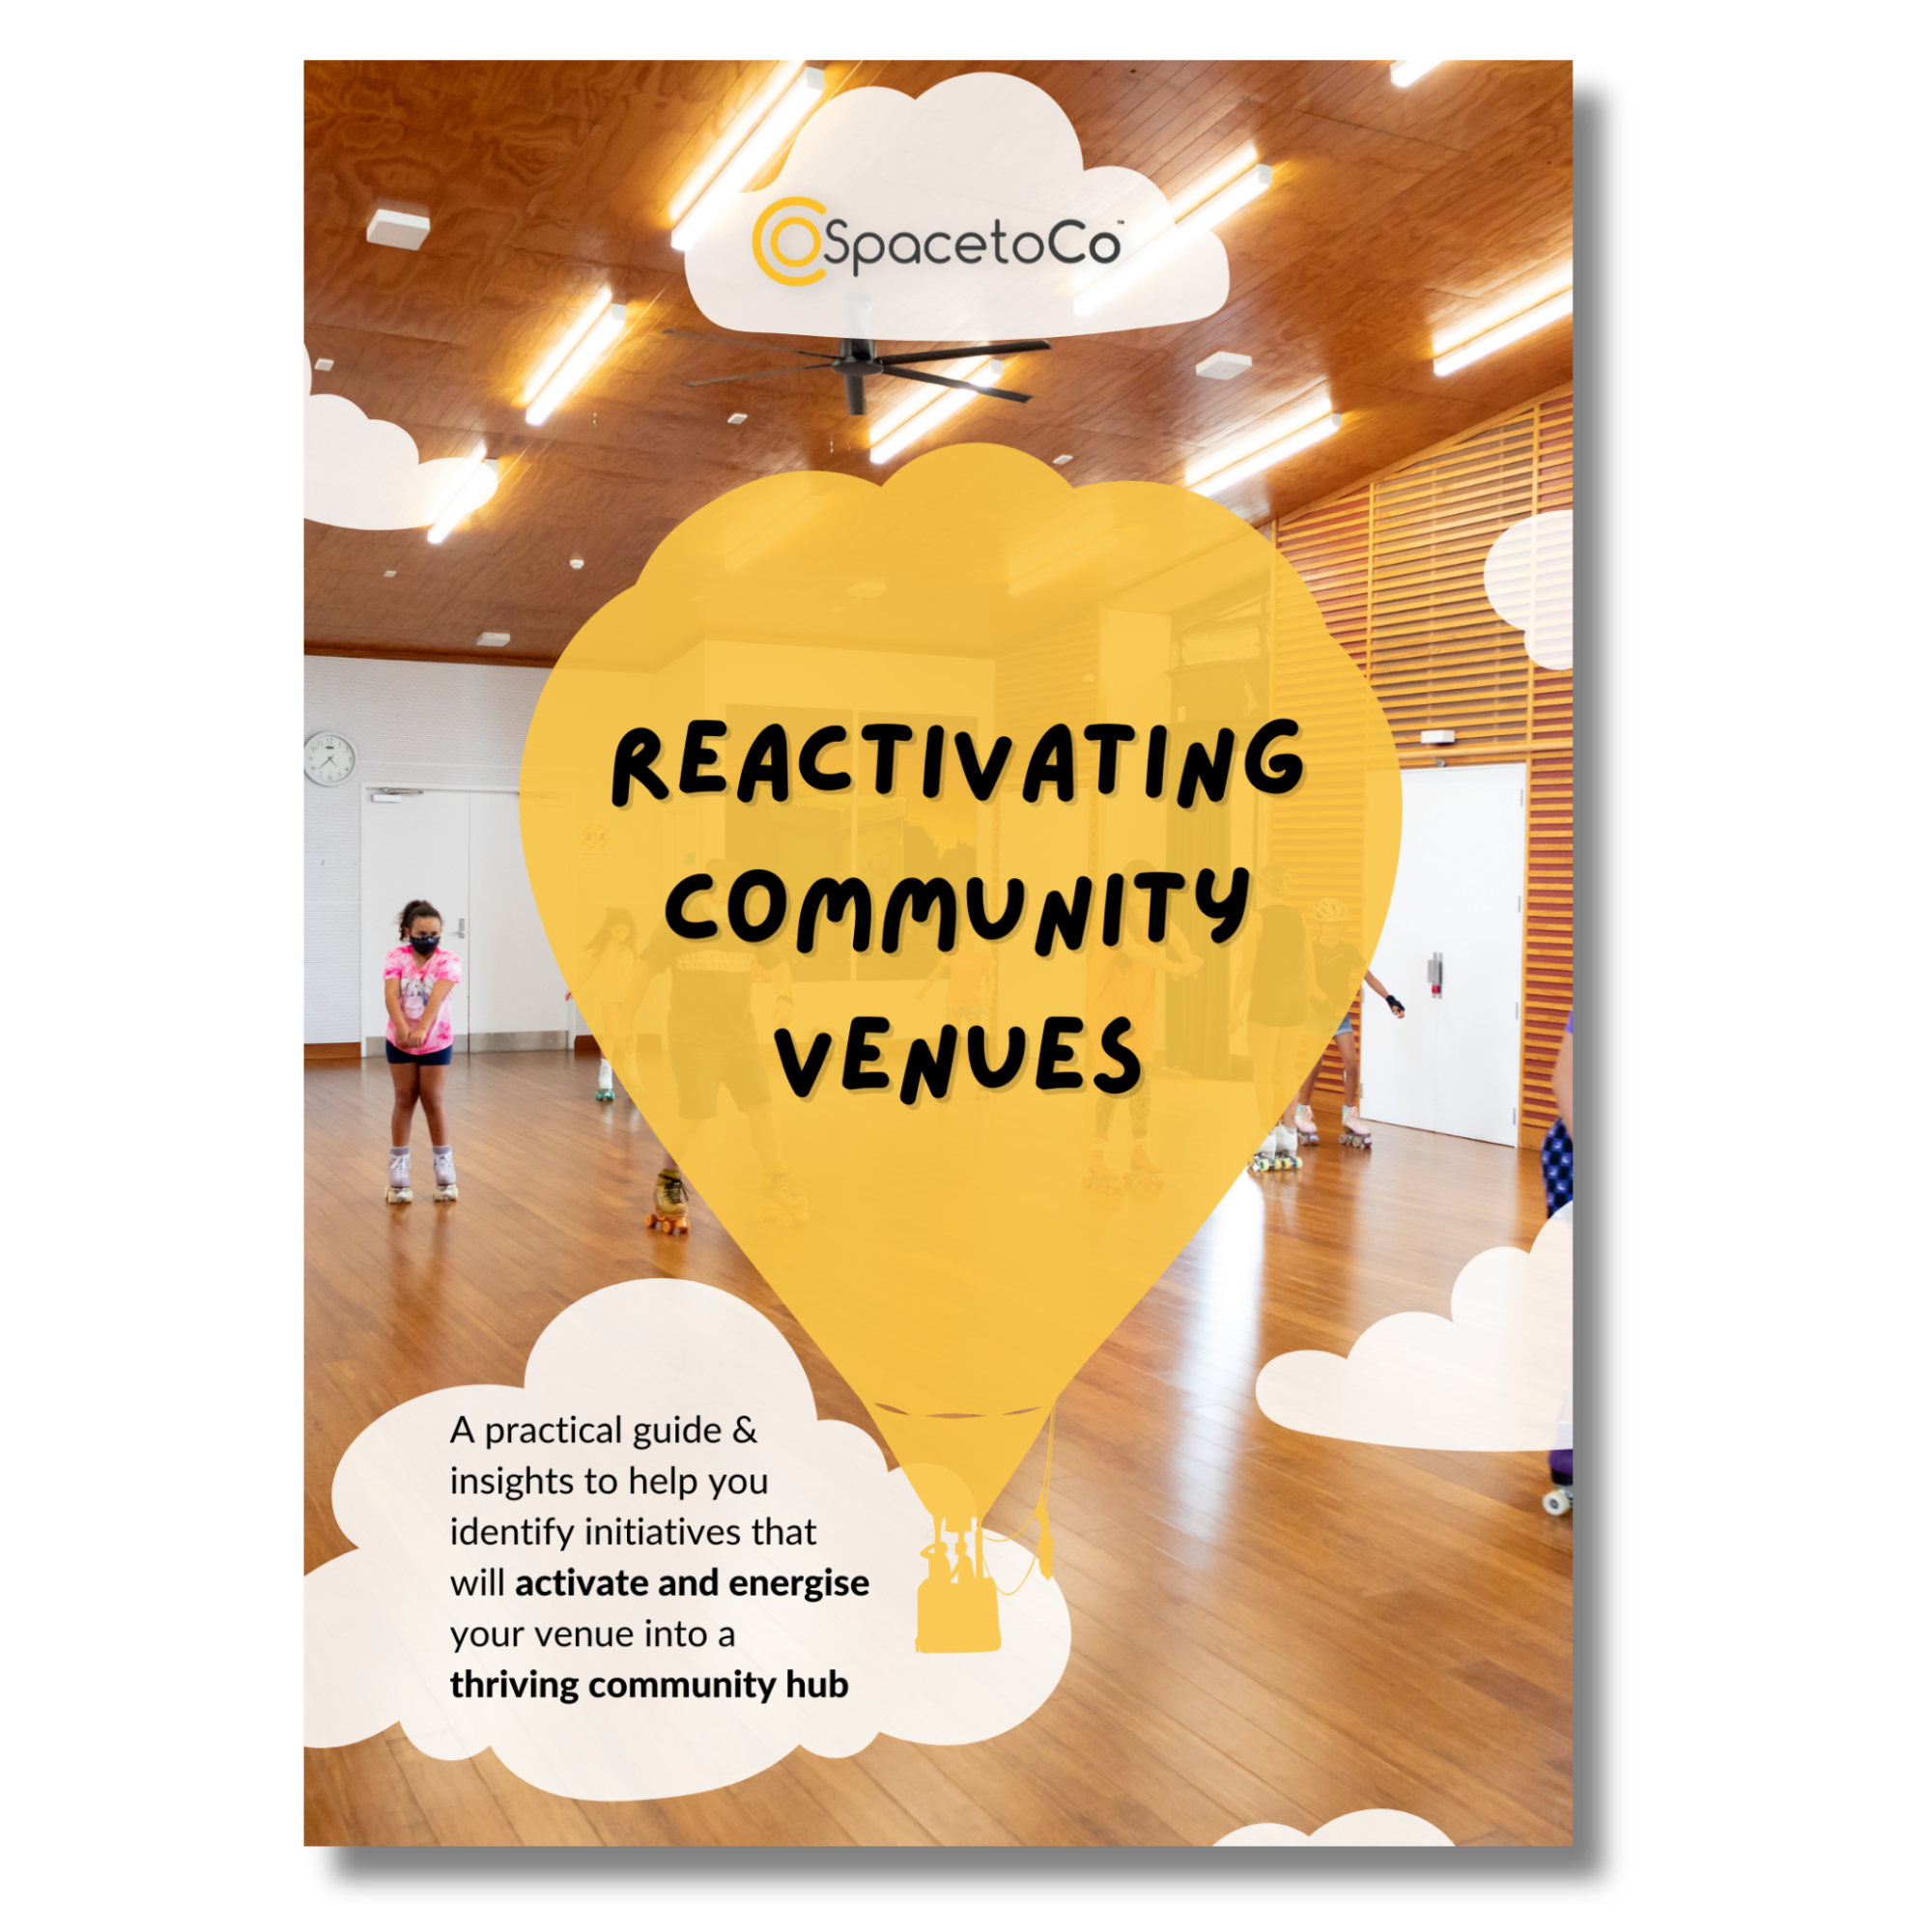 Reactivating community venues guide cover